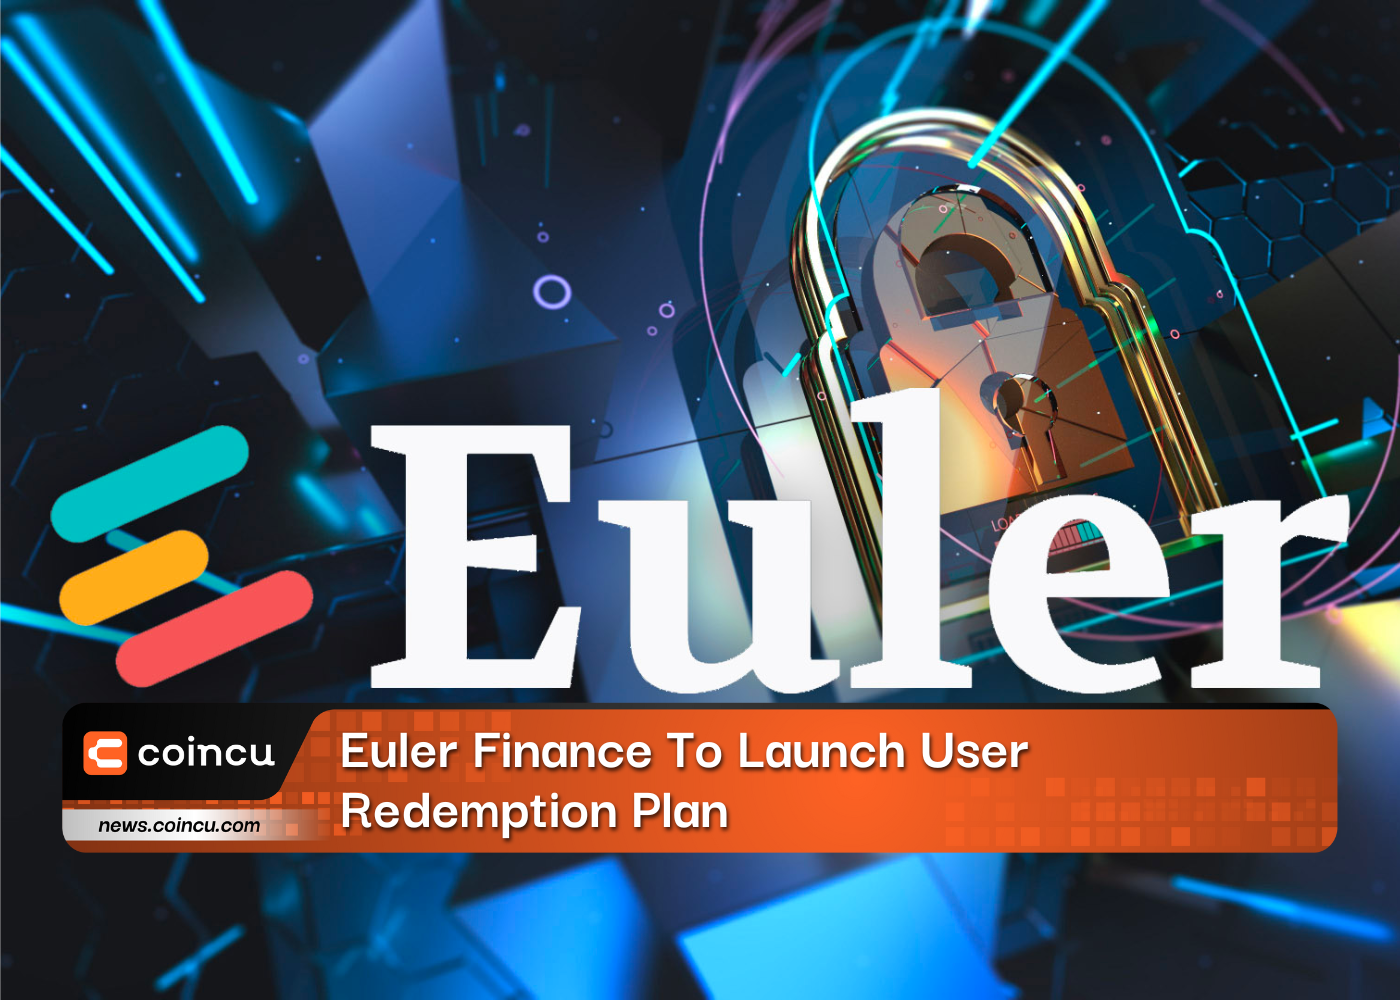 Euler Finance To Launch User Redemption Plan